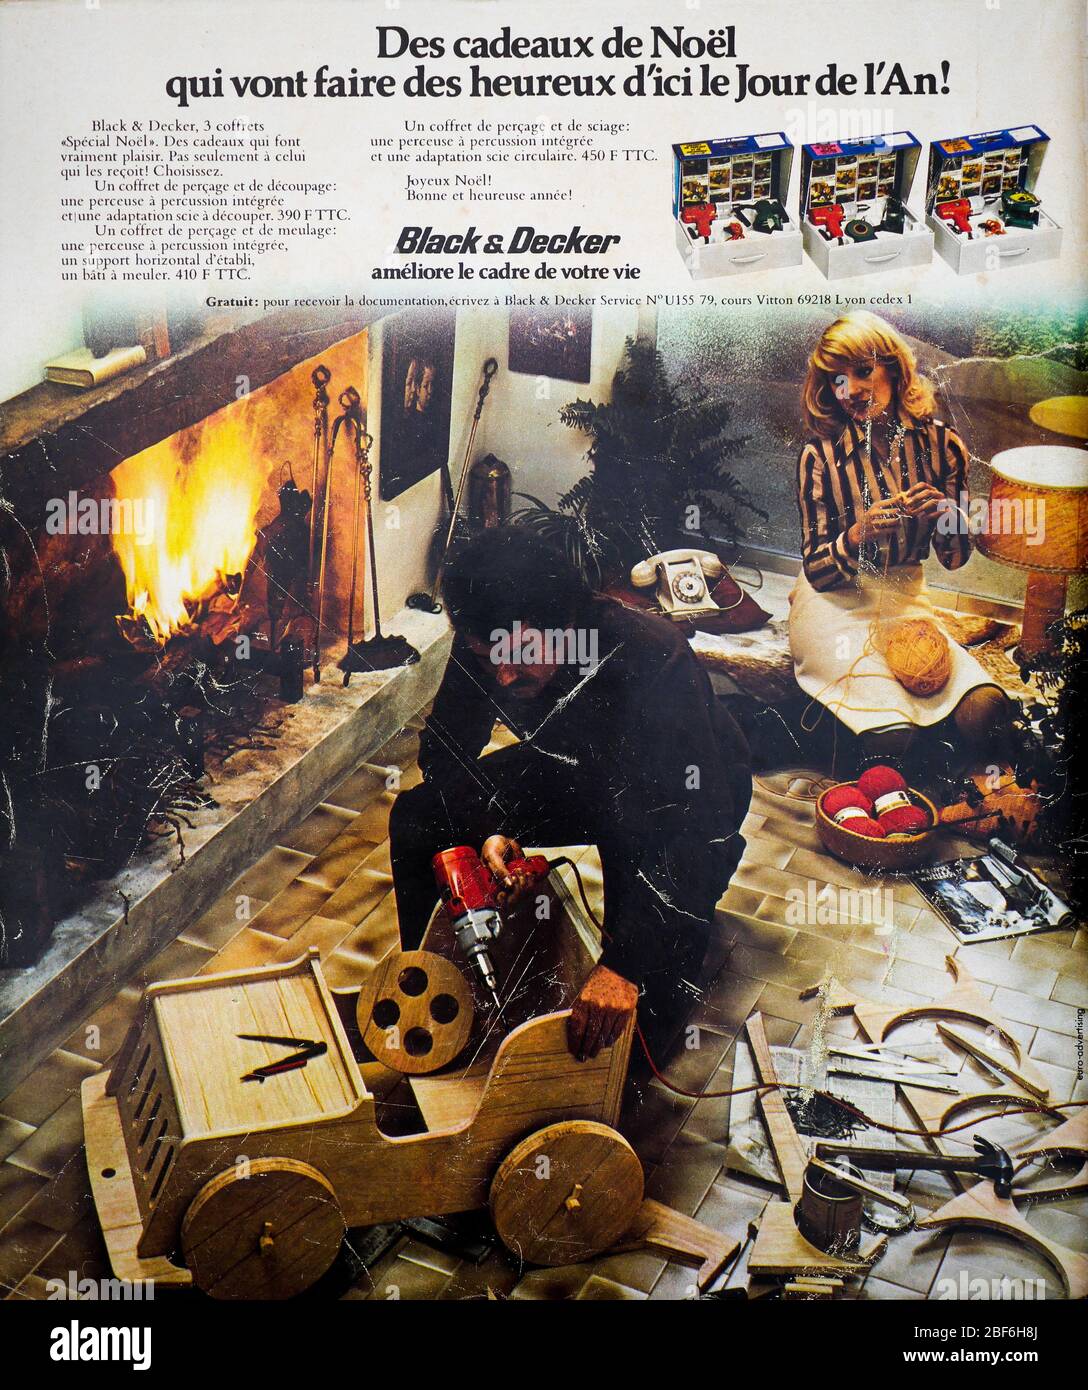 Advertisement page for Black & Decker tools, published on the back cover of  the French news magazine Paris-Match, 1974, France Stock Photo - Alamy